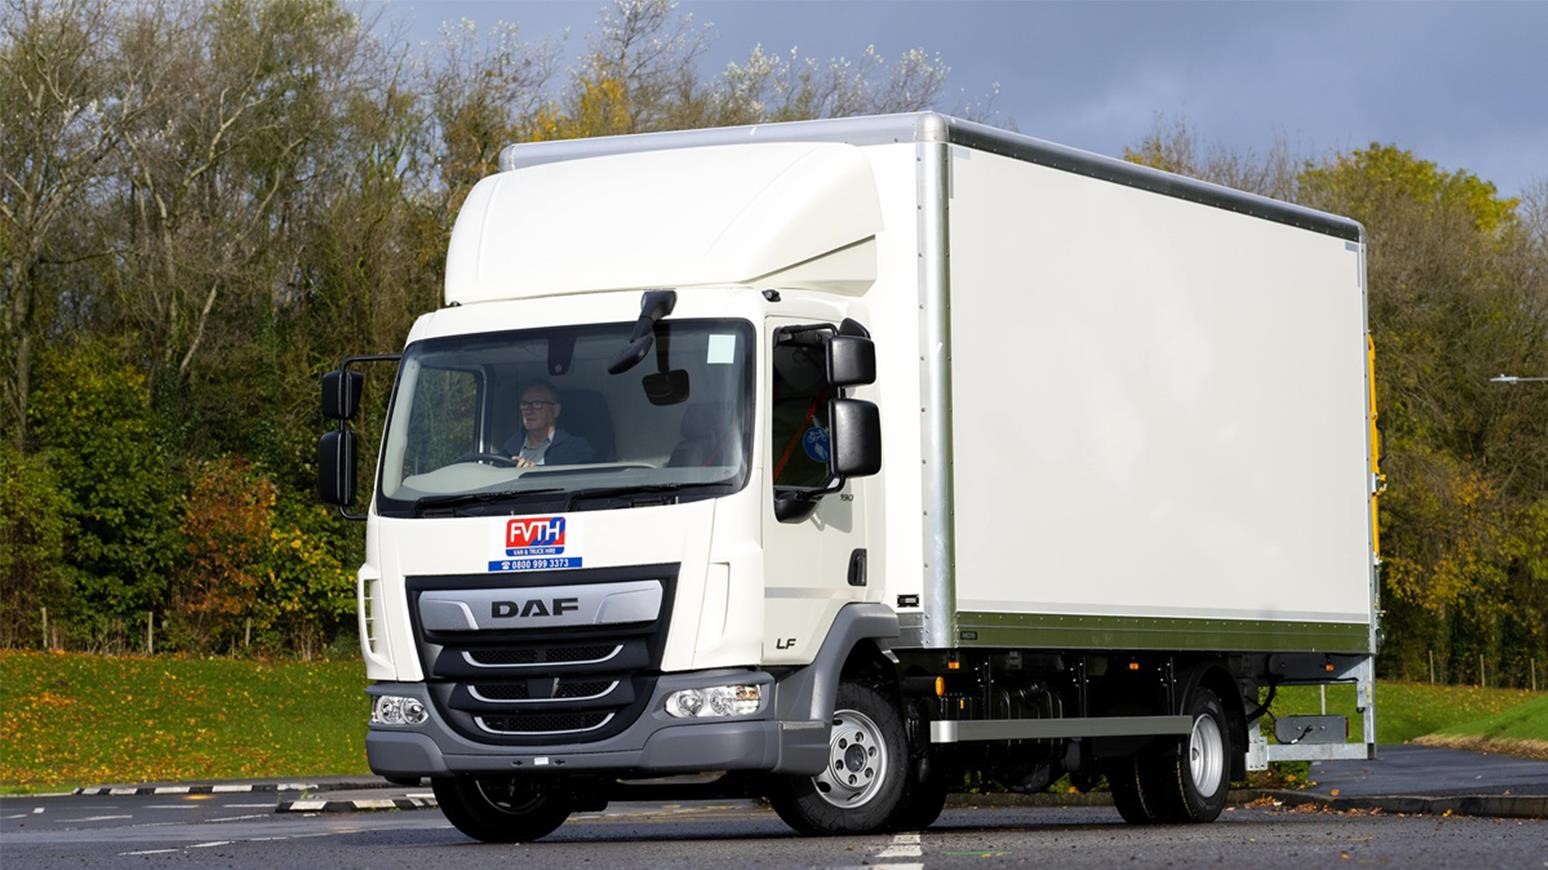 Daf LF Rigid’s PowerLine Transmission Brings Drivability, Fuel Economy To Portsmouth Truck Hire Company